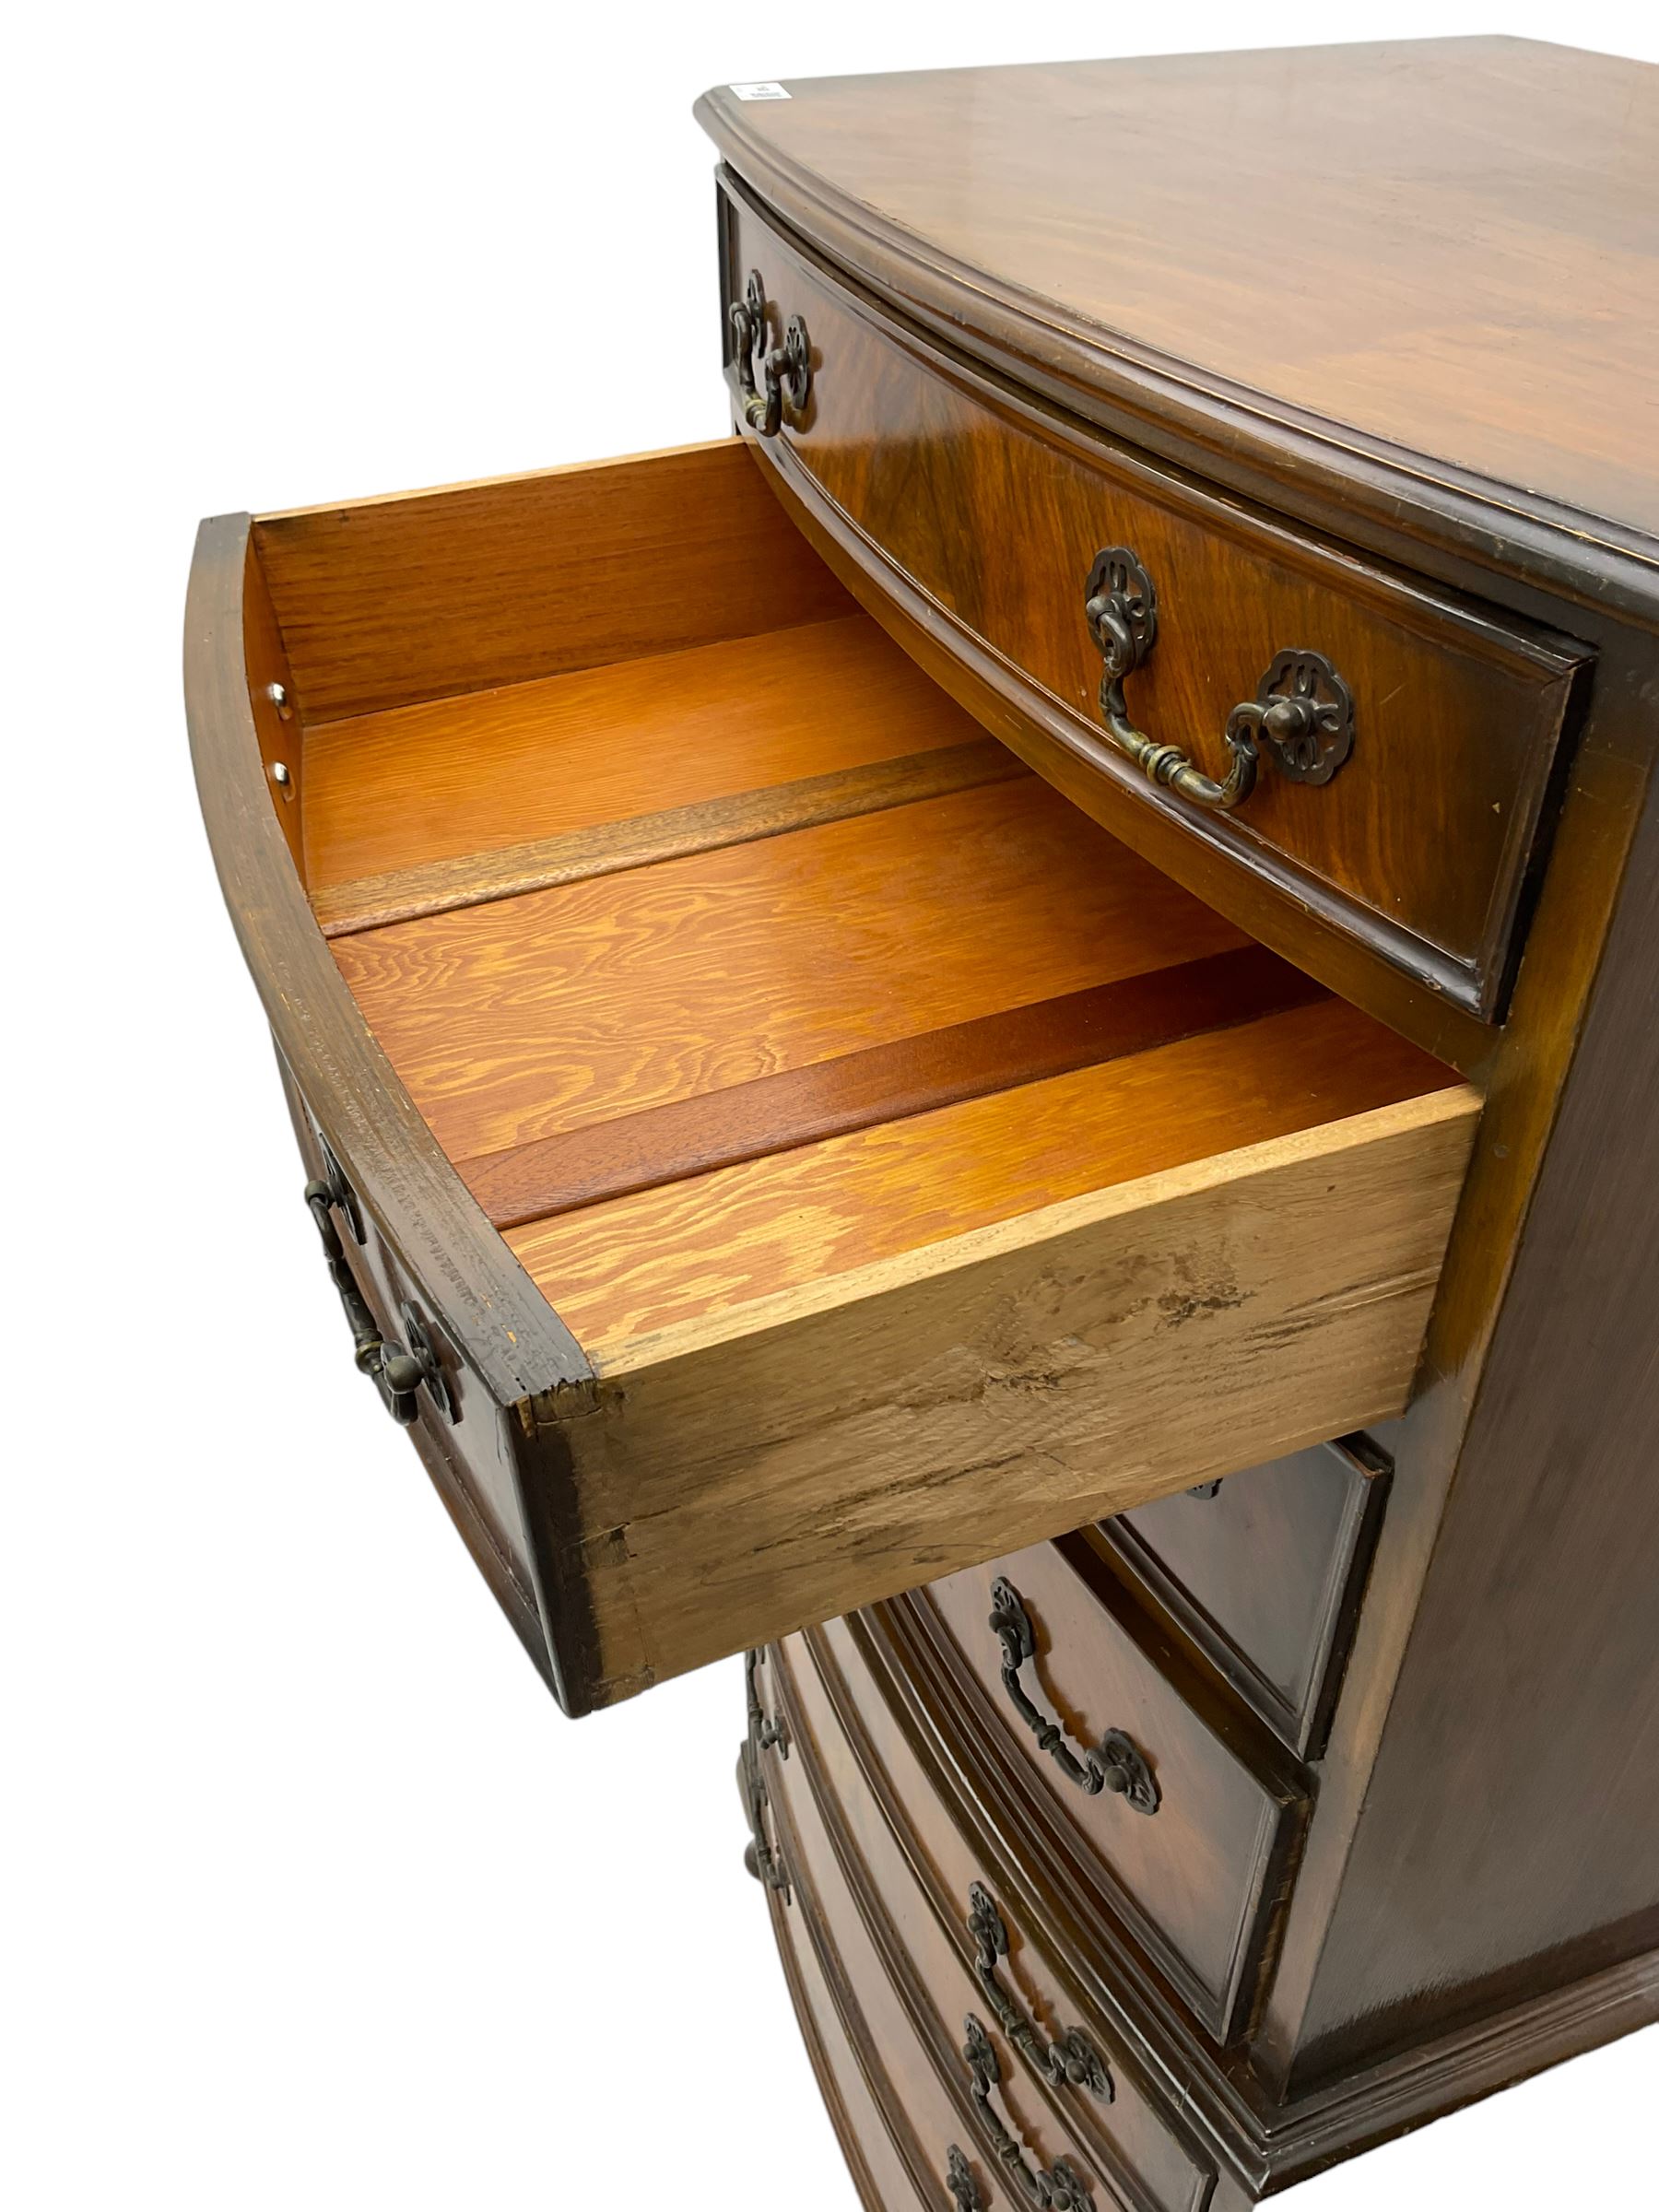 Mid-20th century walnut bow-front chest on chest - Image 7 of 7